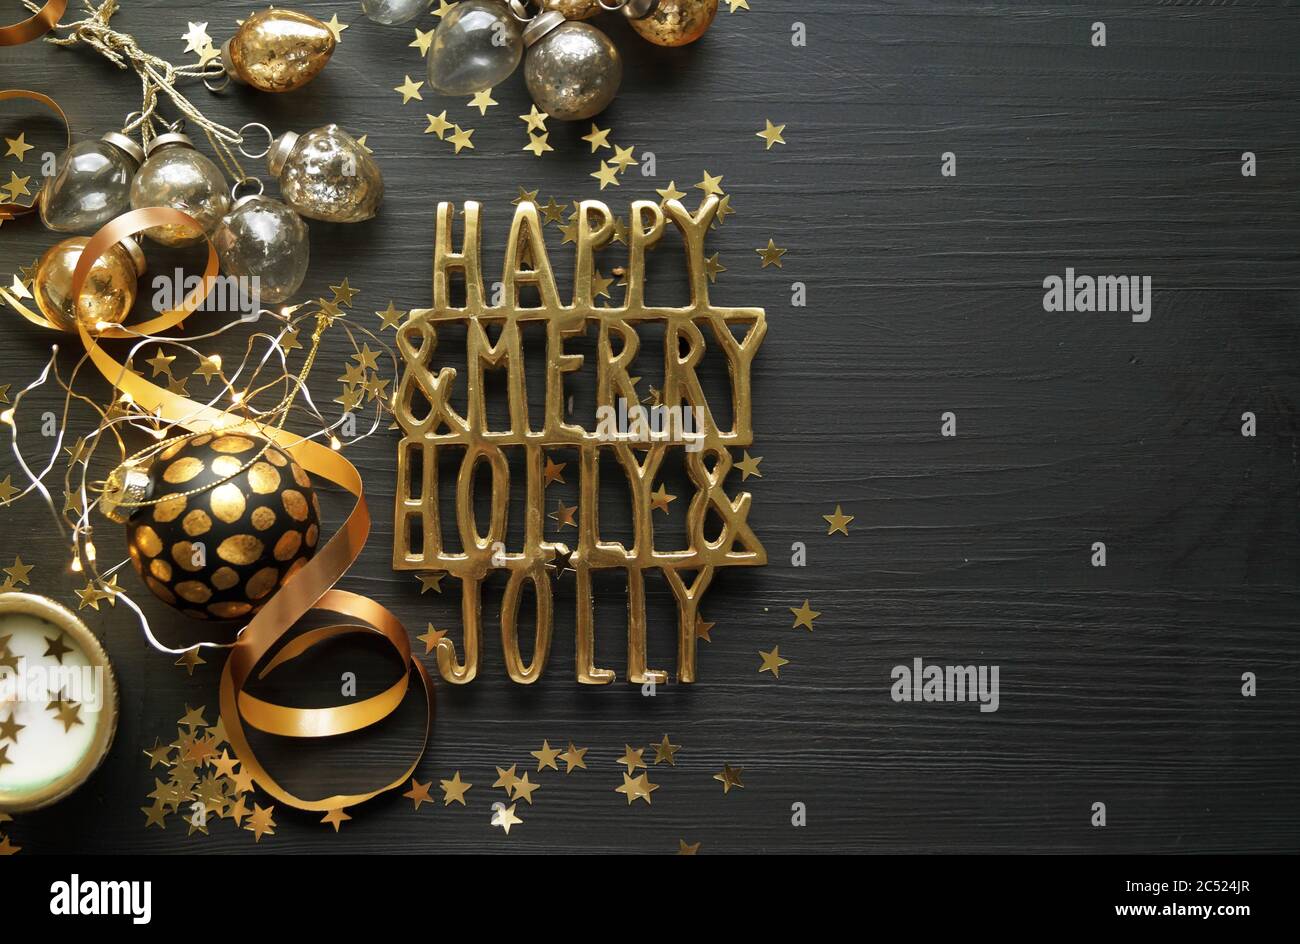 Golden Christmas Ornaments And Decorations Stock Photo Alamy